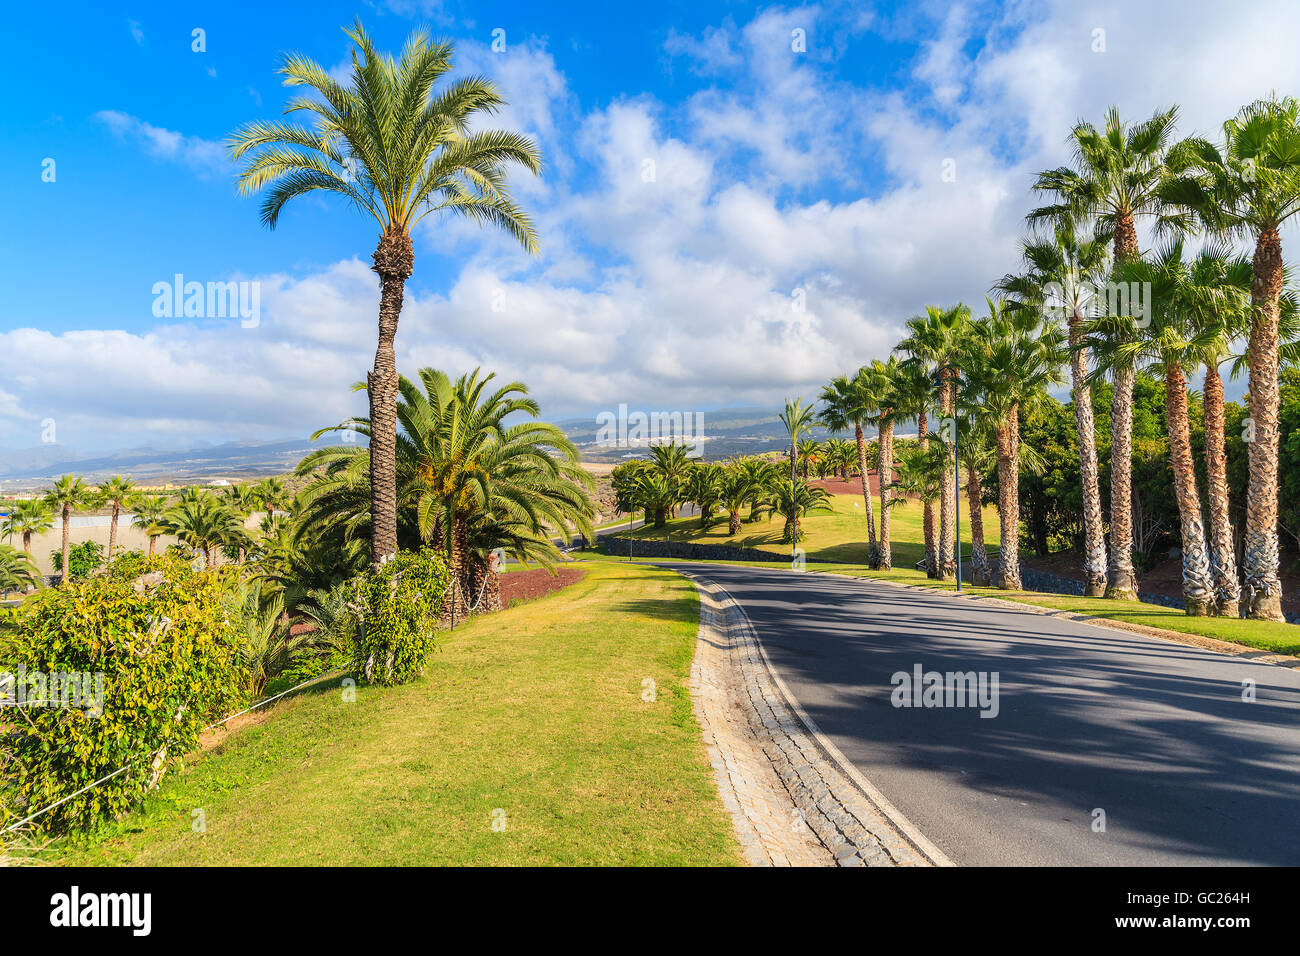 Palm trees along a road in tropical landscape of Tenerife, Canary Islands, Spain Stock Photo